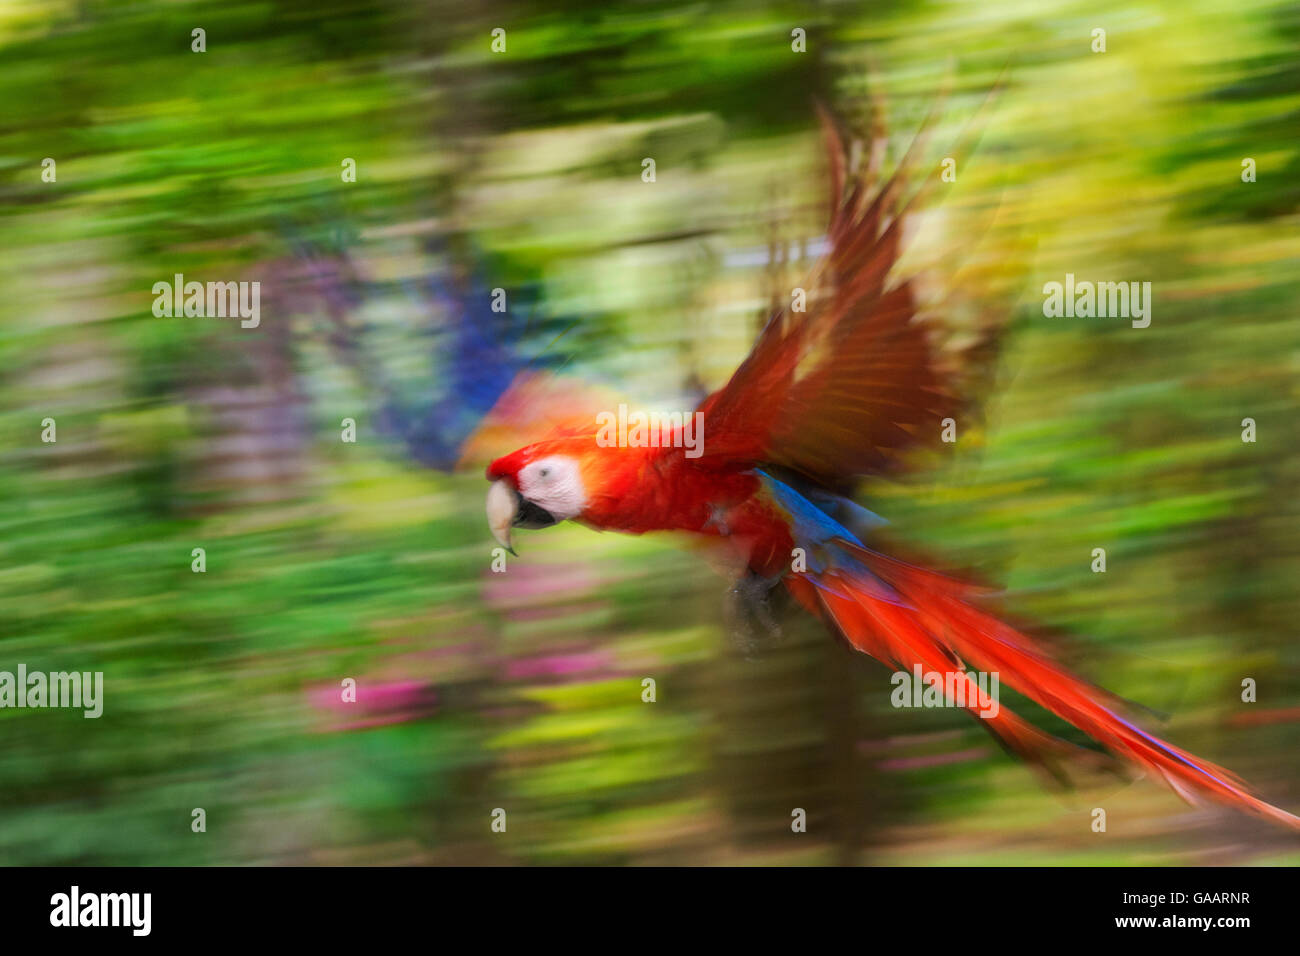 Scarlet macaw (Ara macao) flying, blurred motion. Costa Rica. Stock Photo